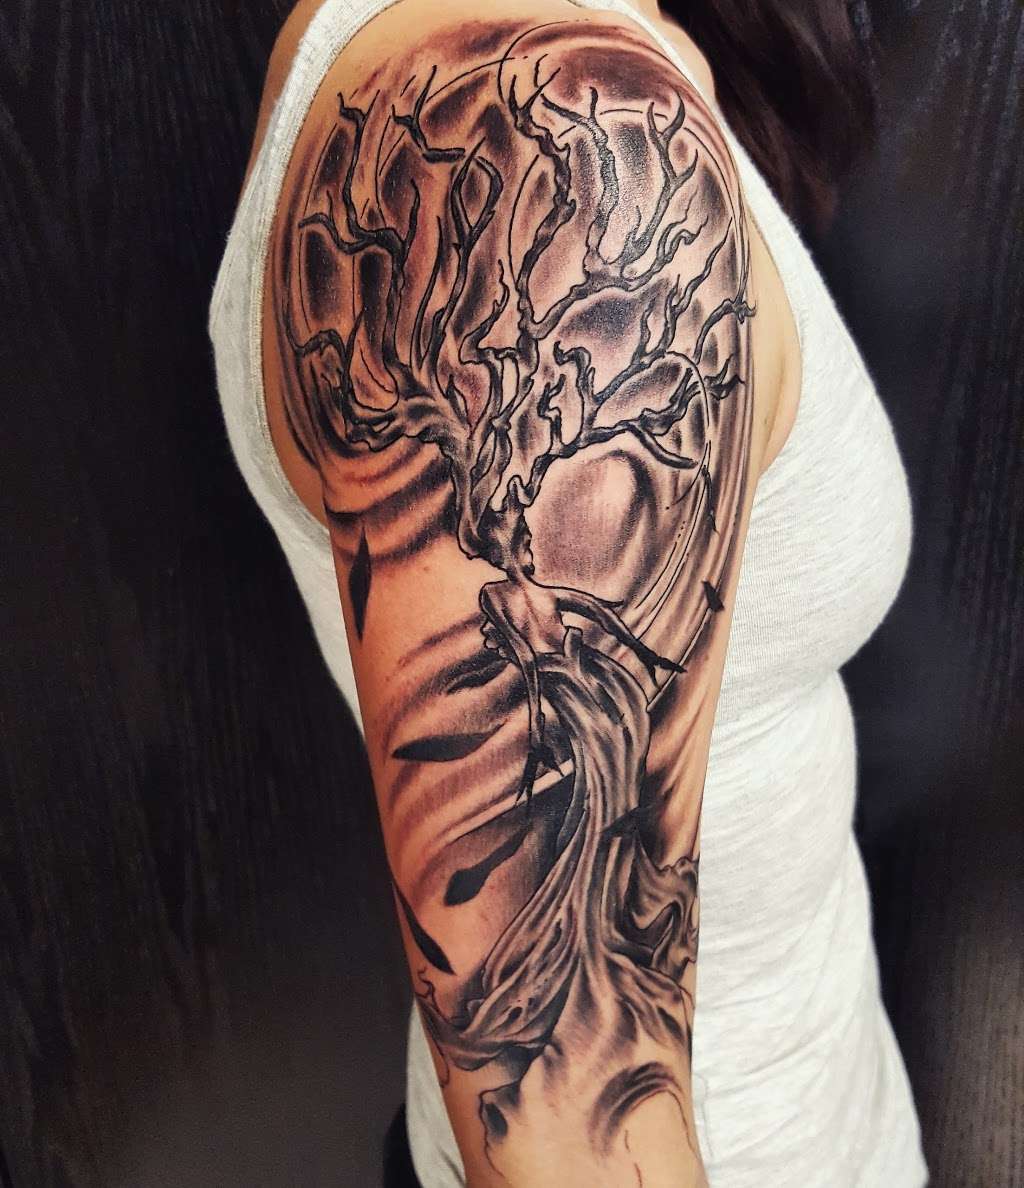 7 Day Gallery Tattoo & Art Gallery | 6000 W 159th St, Oak Forest, IL 60452 | Phone: (708) 897-9855